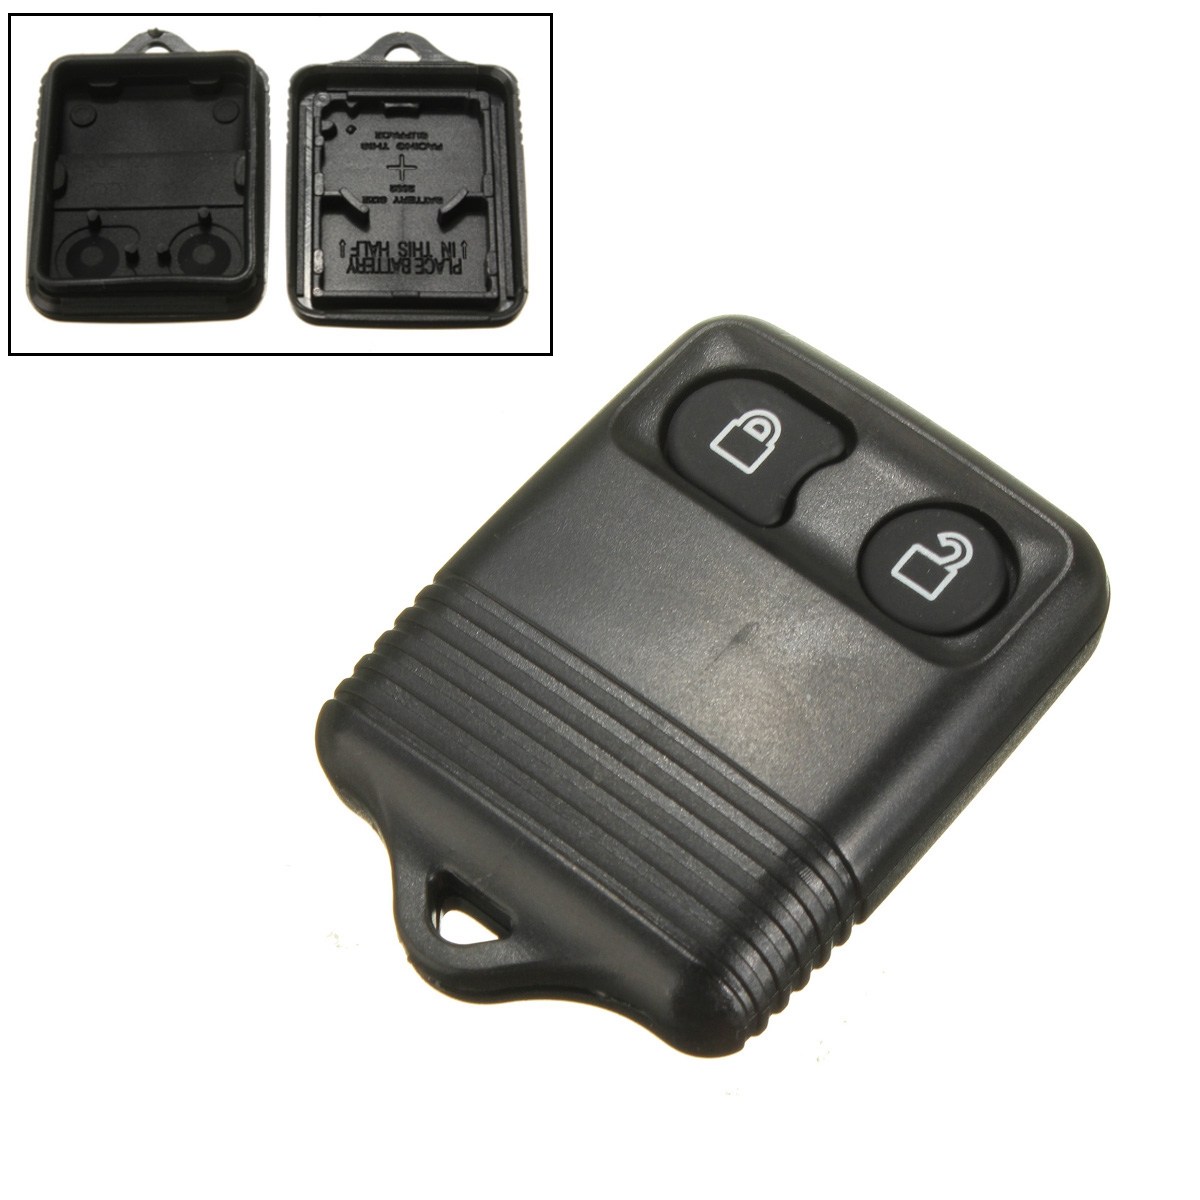 2 Buttons Remote Key Replacement Shell Case For Ford Explorer Escape 2001-2007